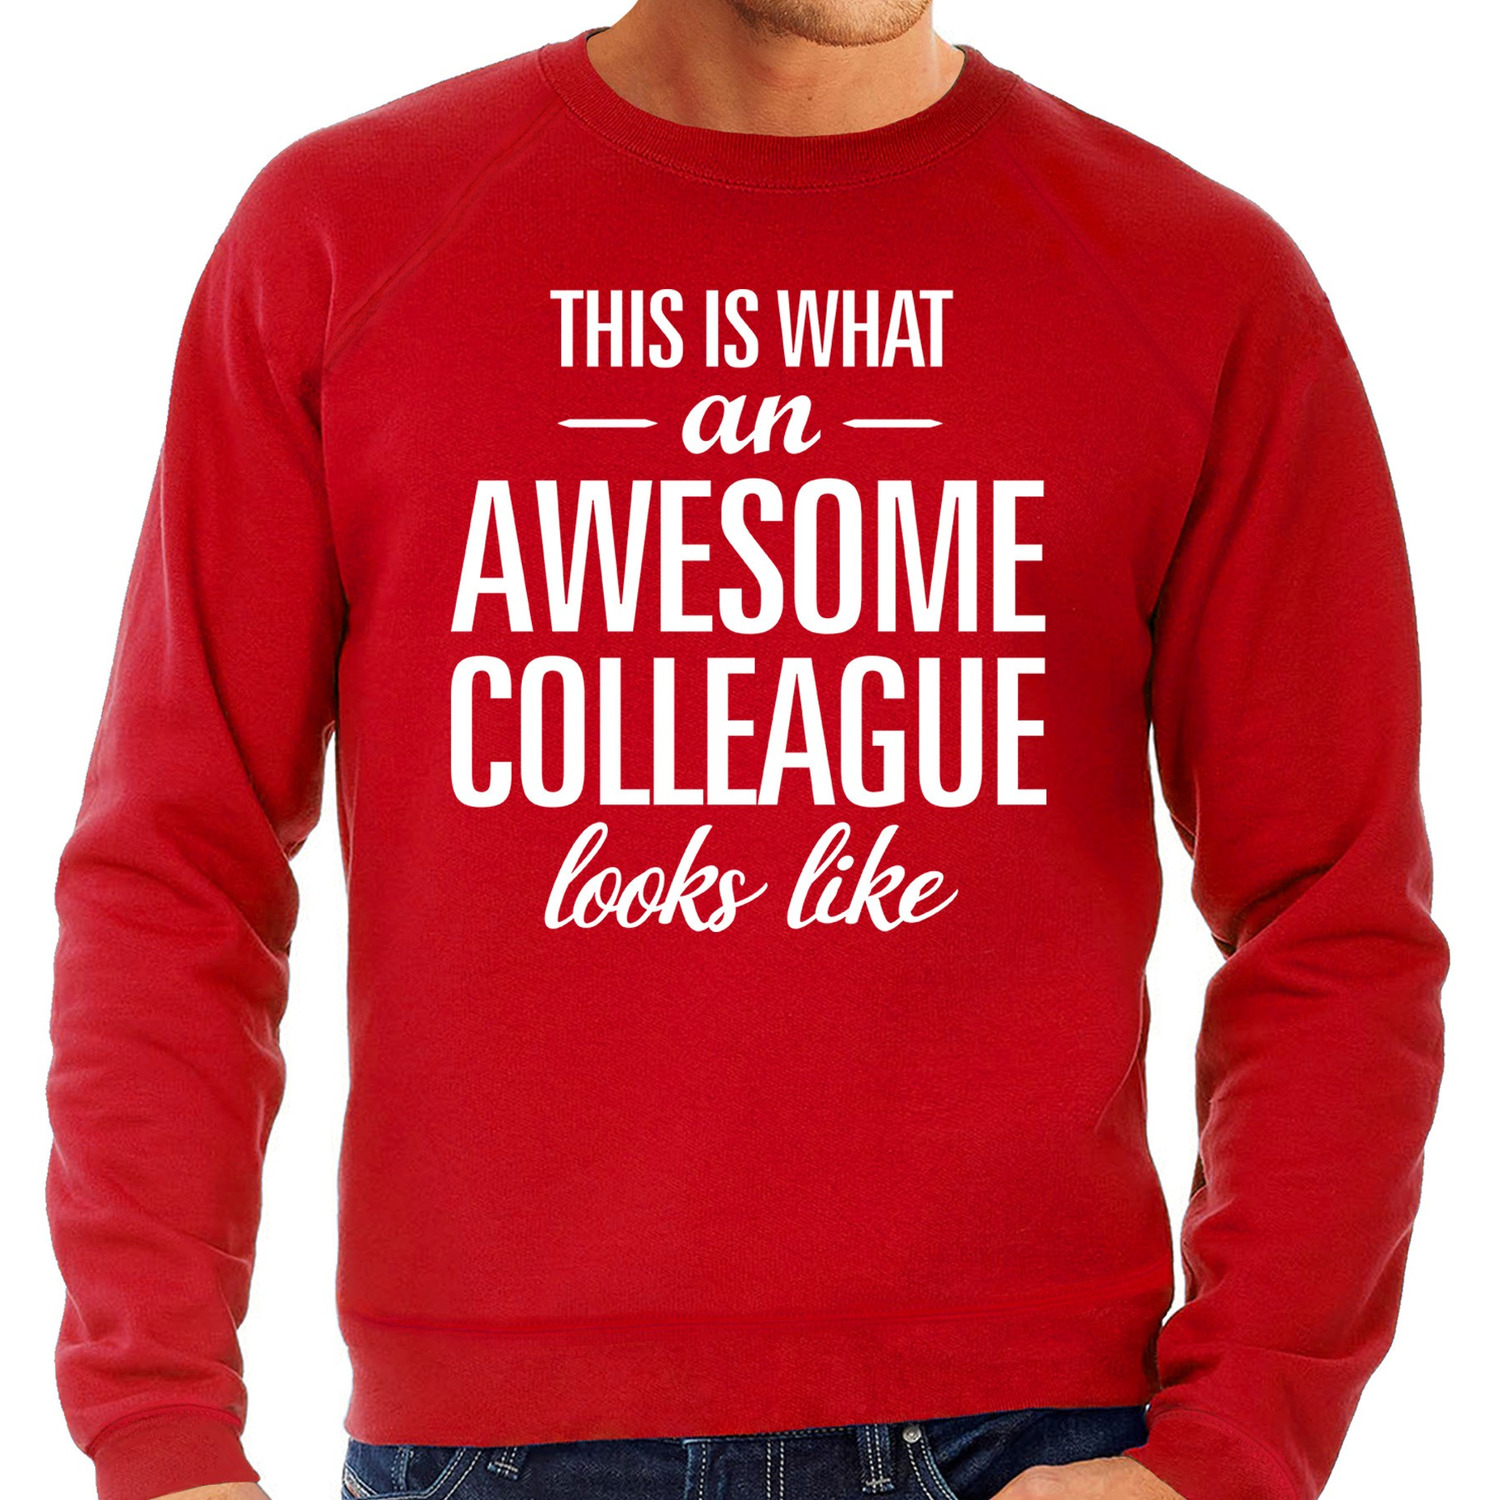 Awesome colleague / collega cadeau sweater rood heren